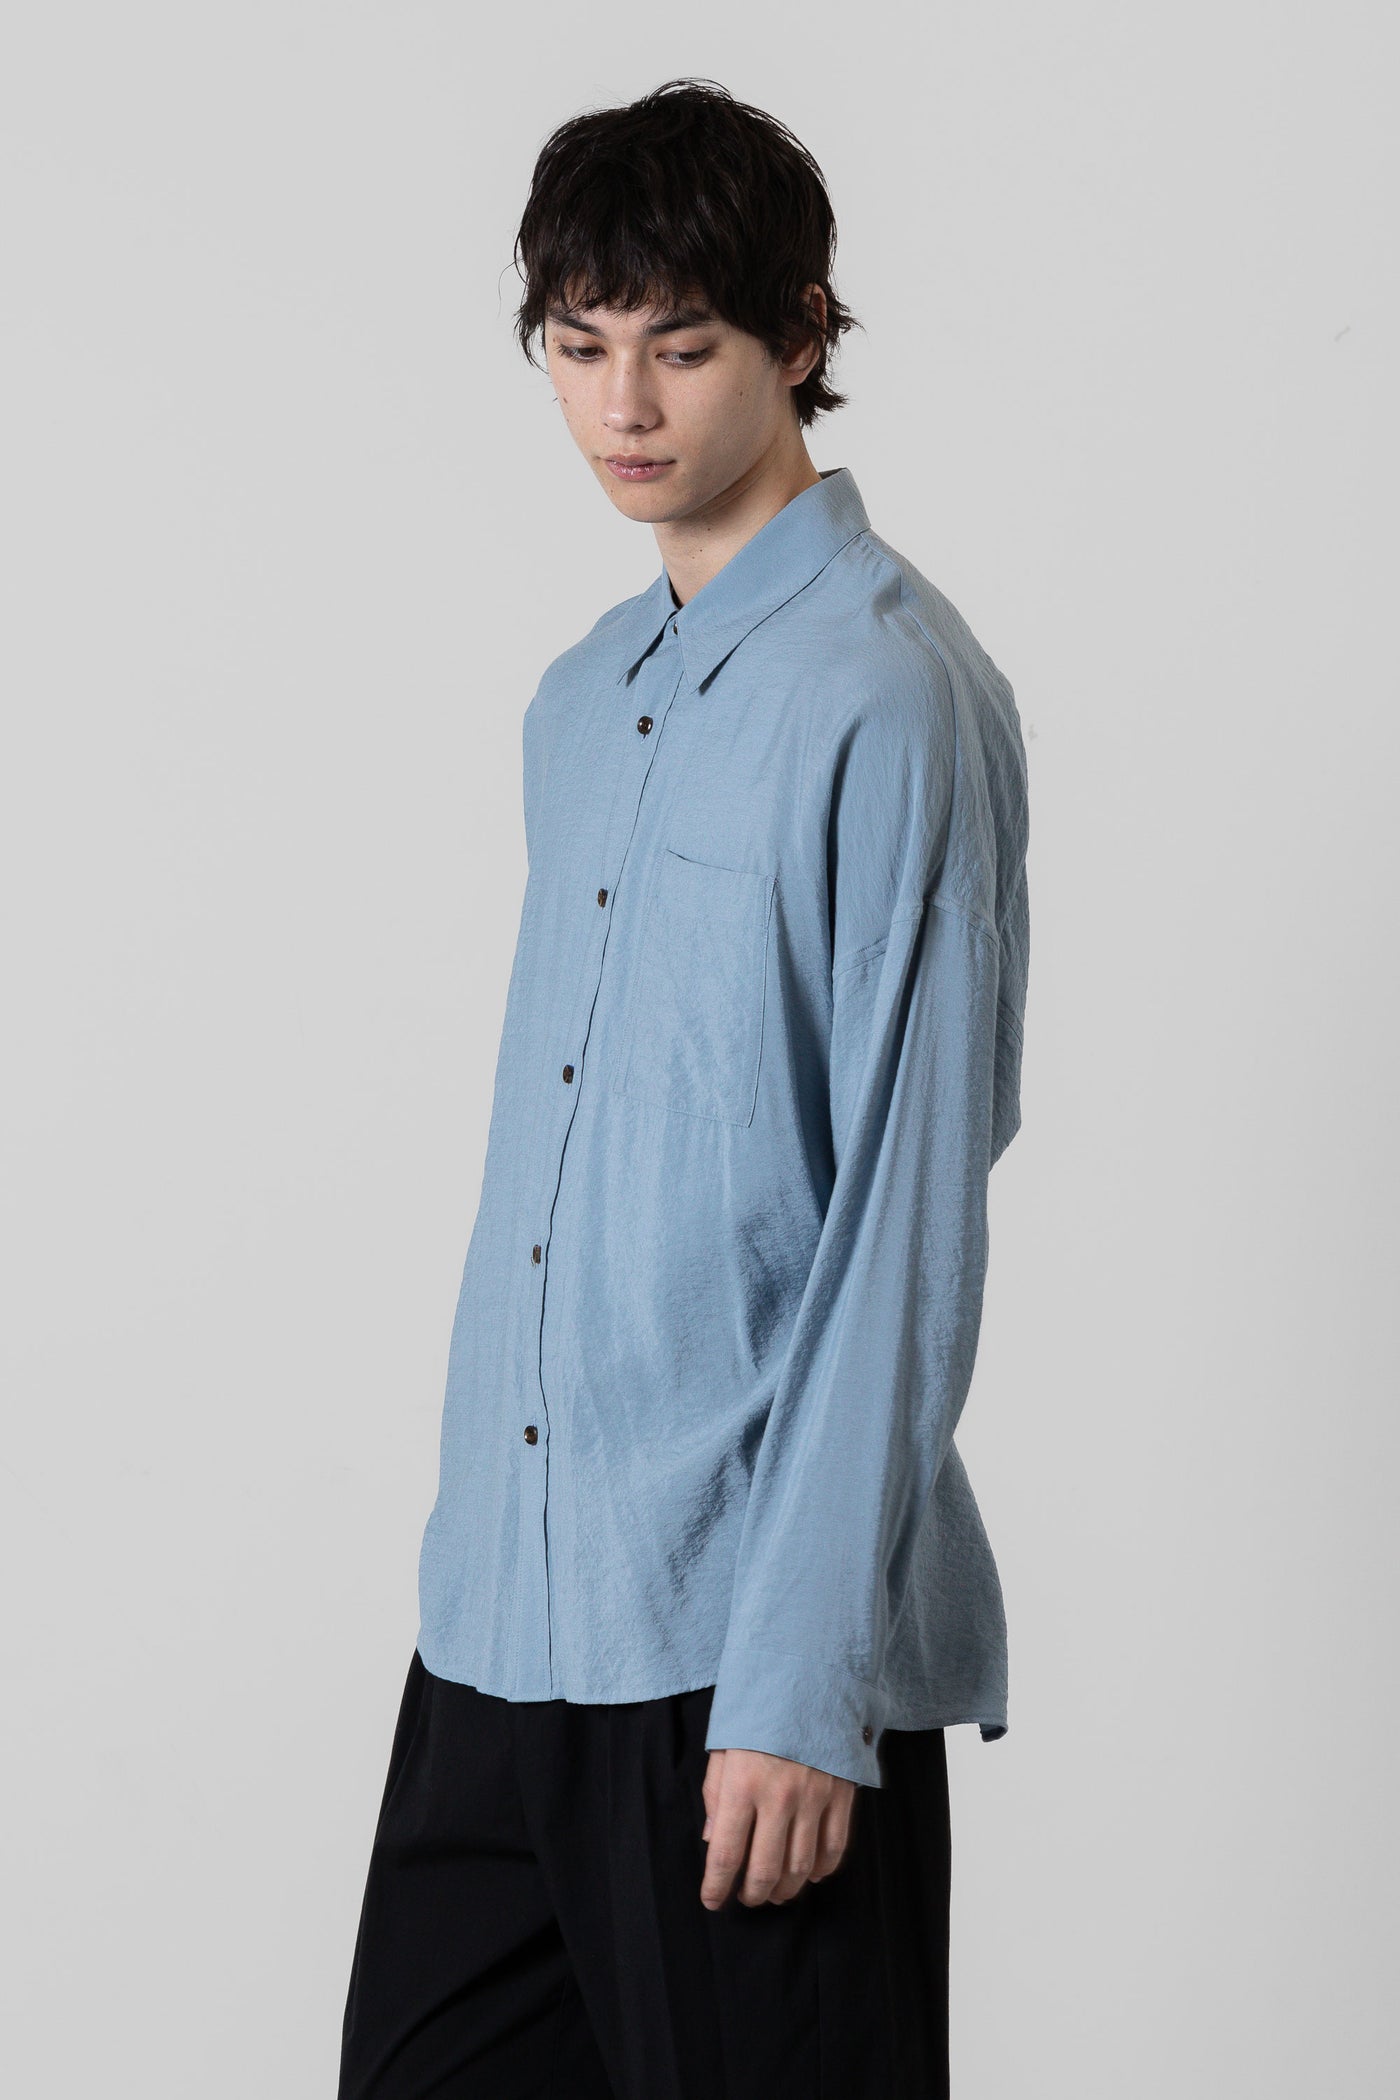 Released in February AS41-012 Rayon/Nylon Lawn Oversized Shirt